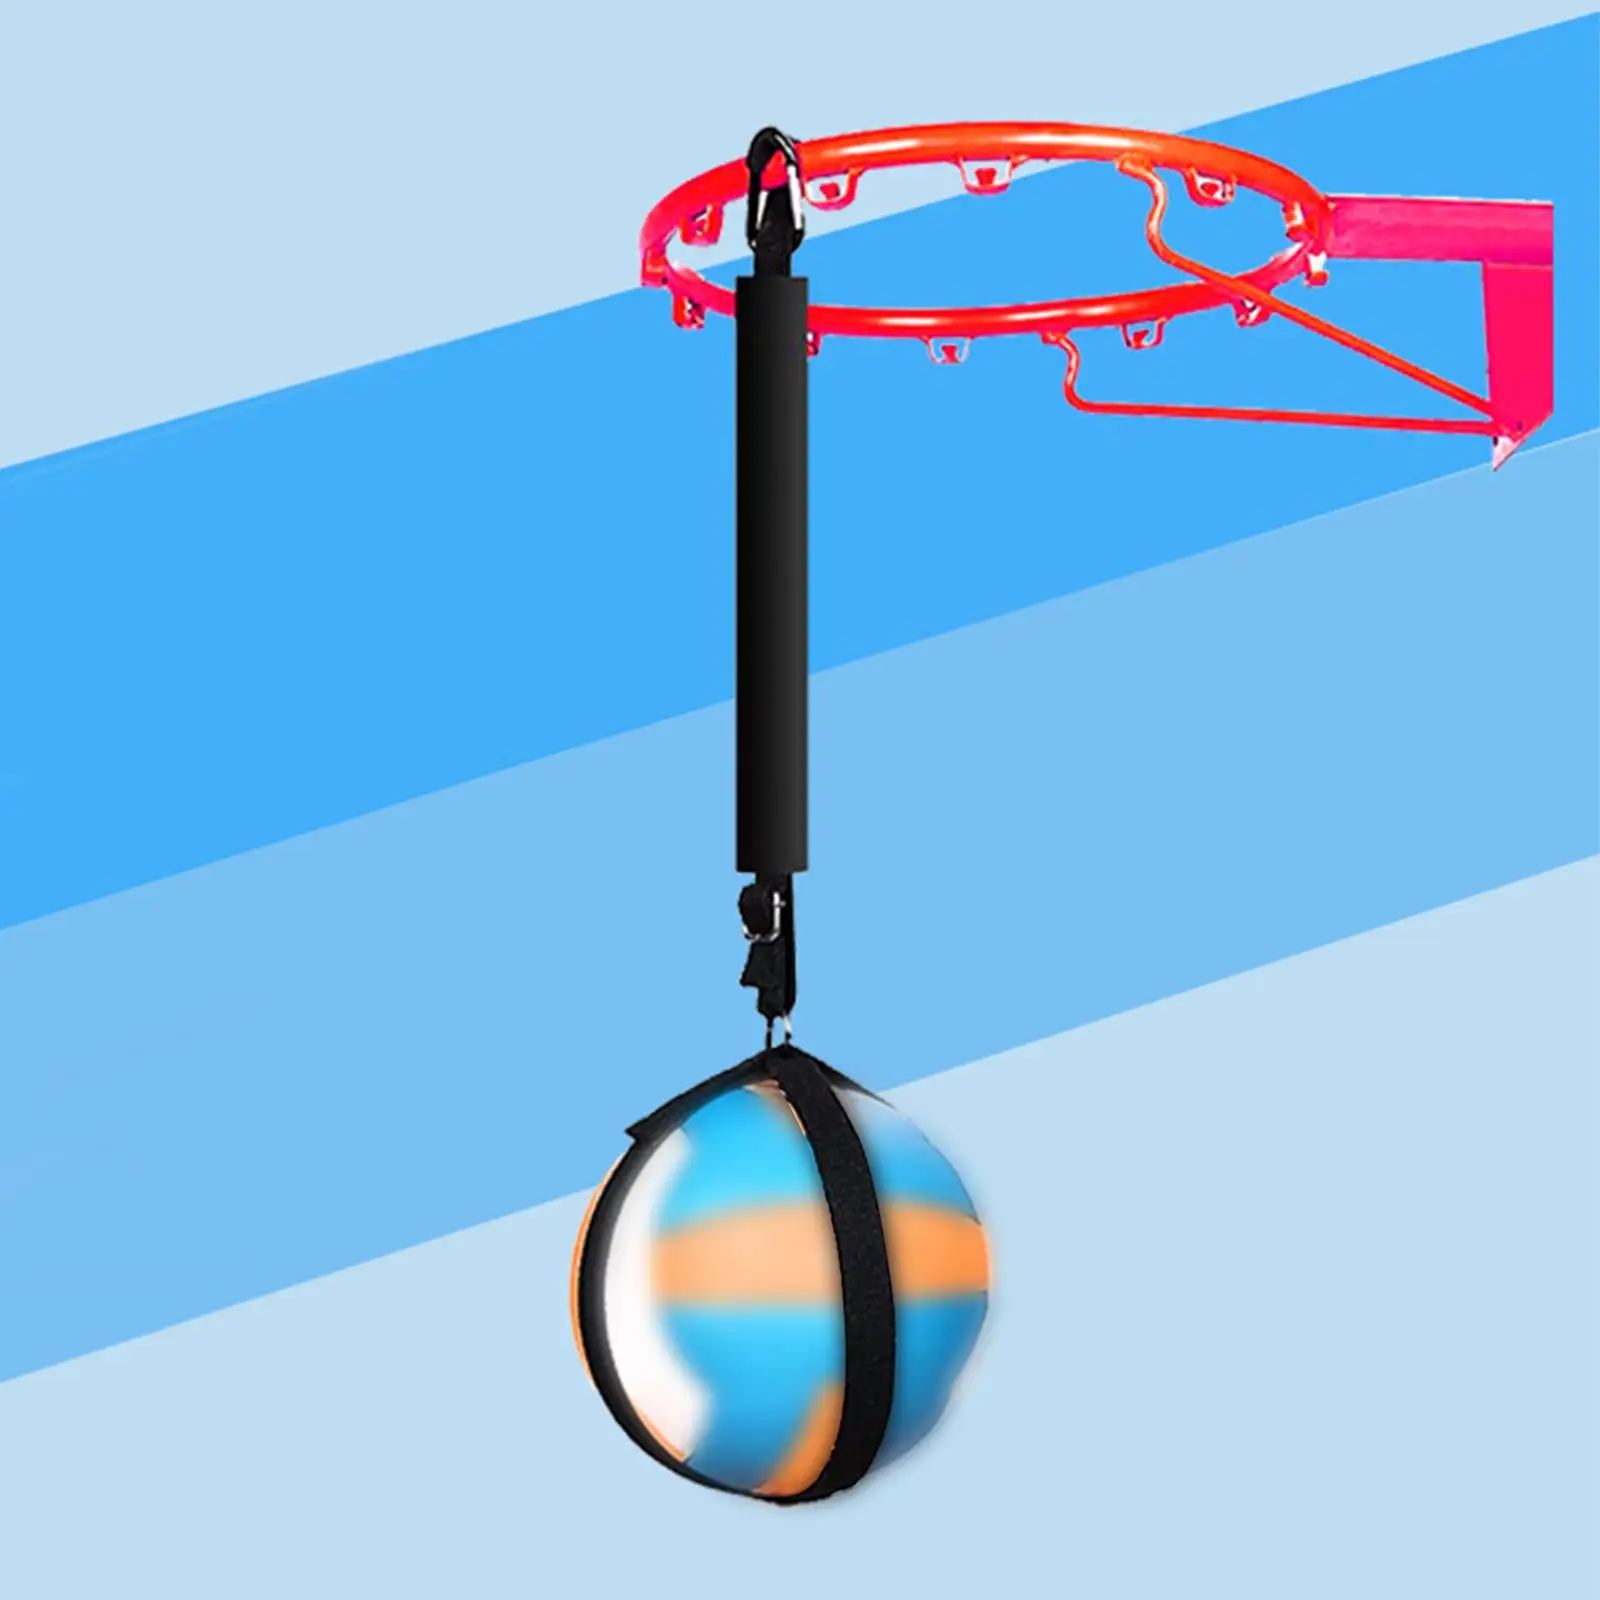 Volleyball Trainer Equipment Practice Basketball Gear Jumping Serving